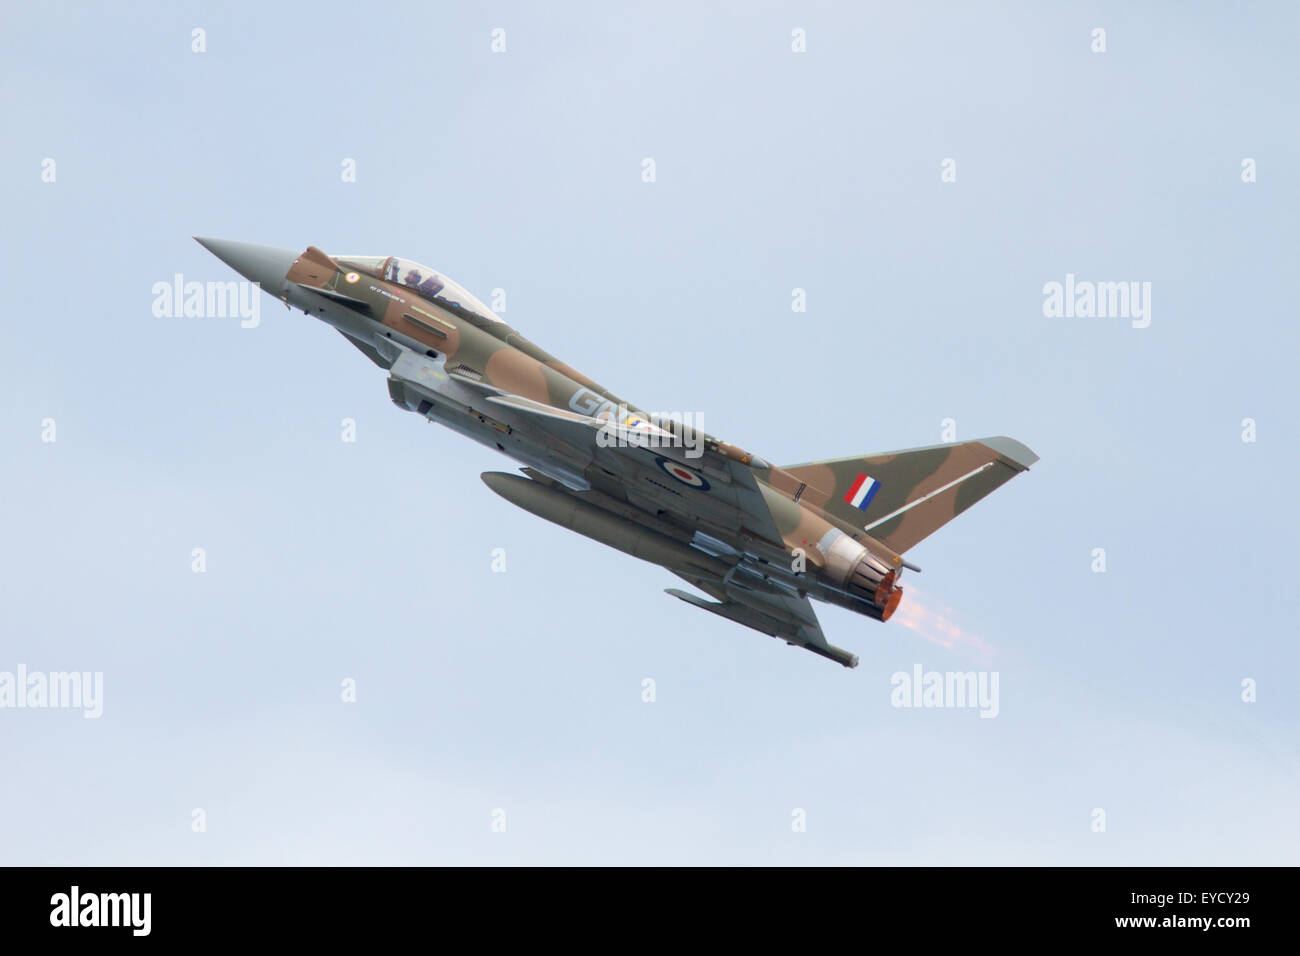 An FGR4 Typhoon Eurofighter flying at the Sunderland Airshow, July 2015 Stock Photo